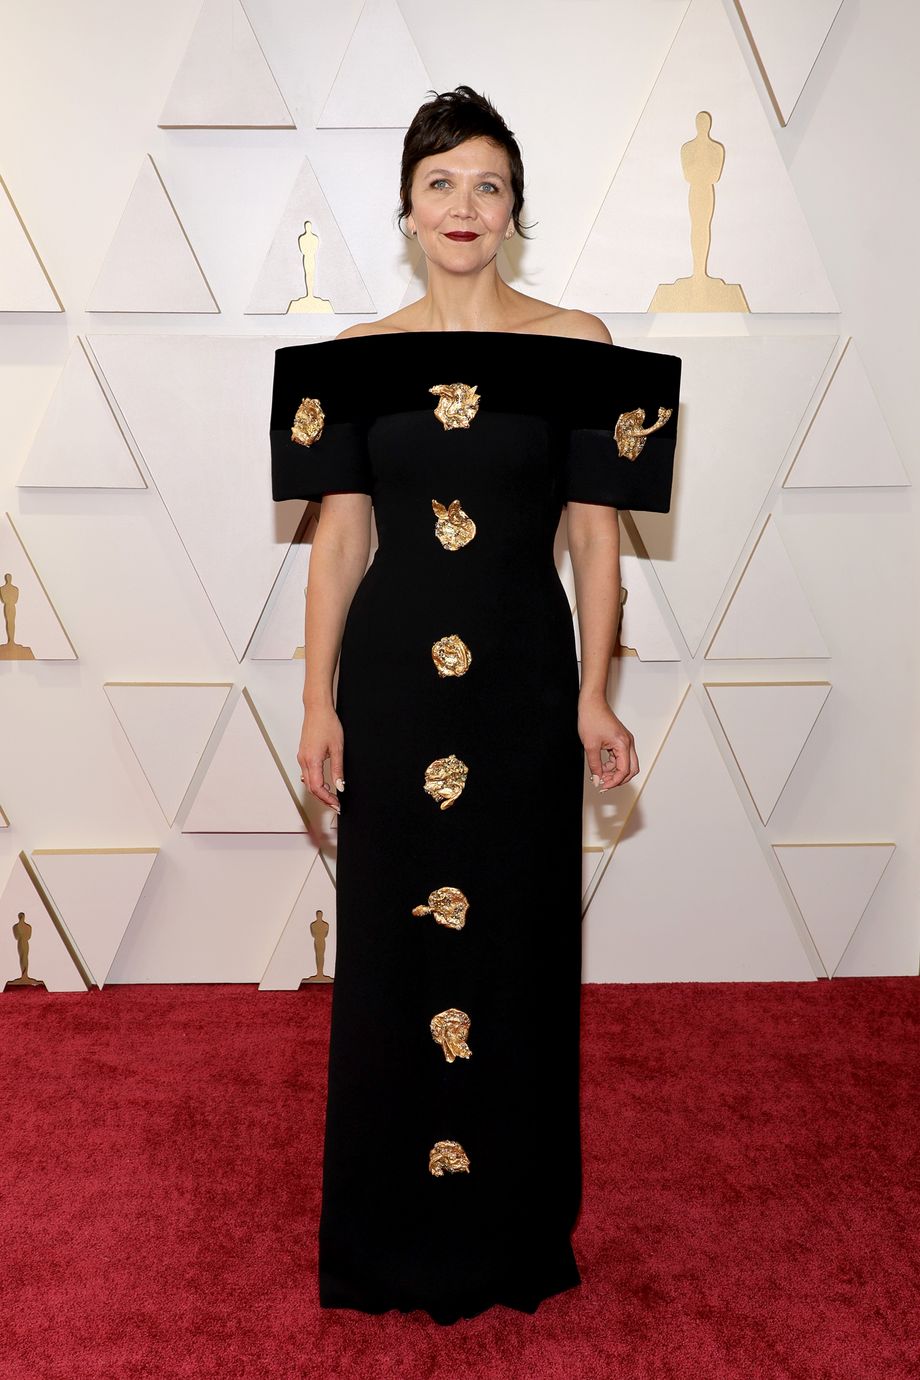 See All the Red Carpet Looks From the 2022 Oscars